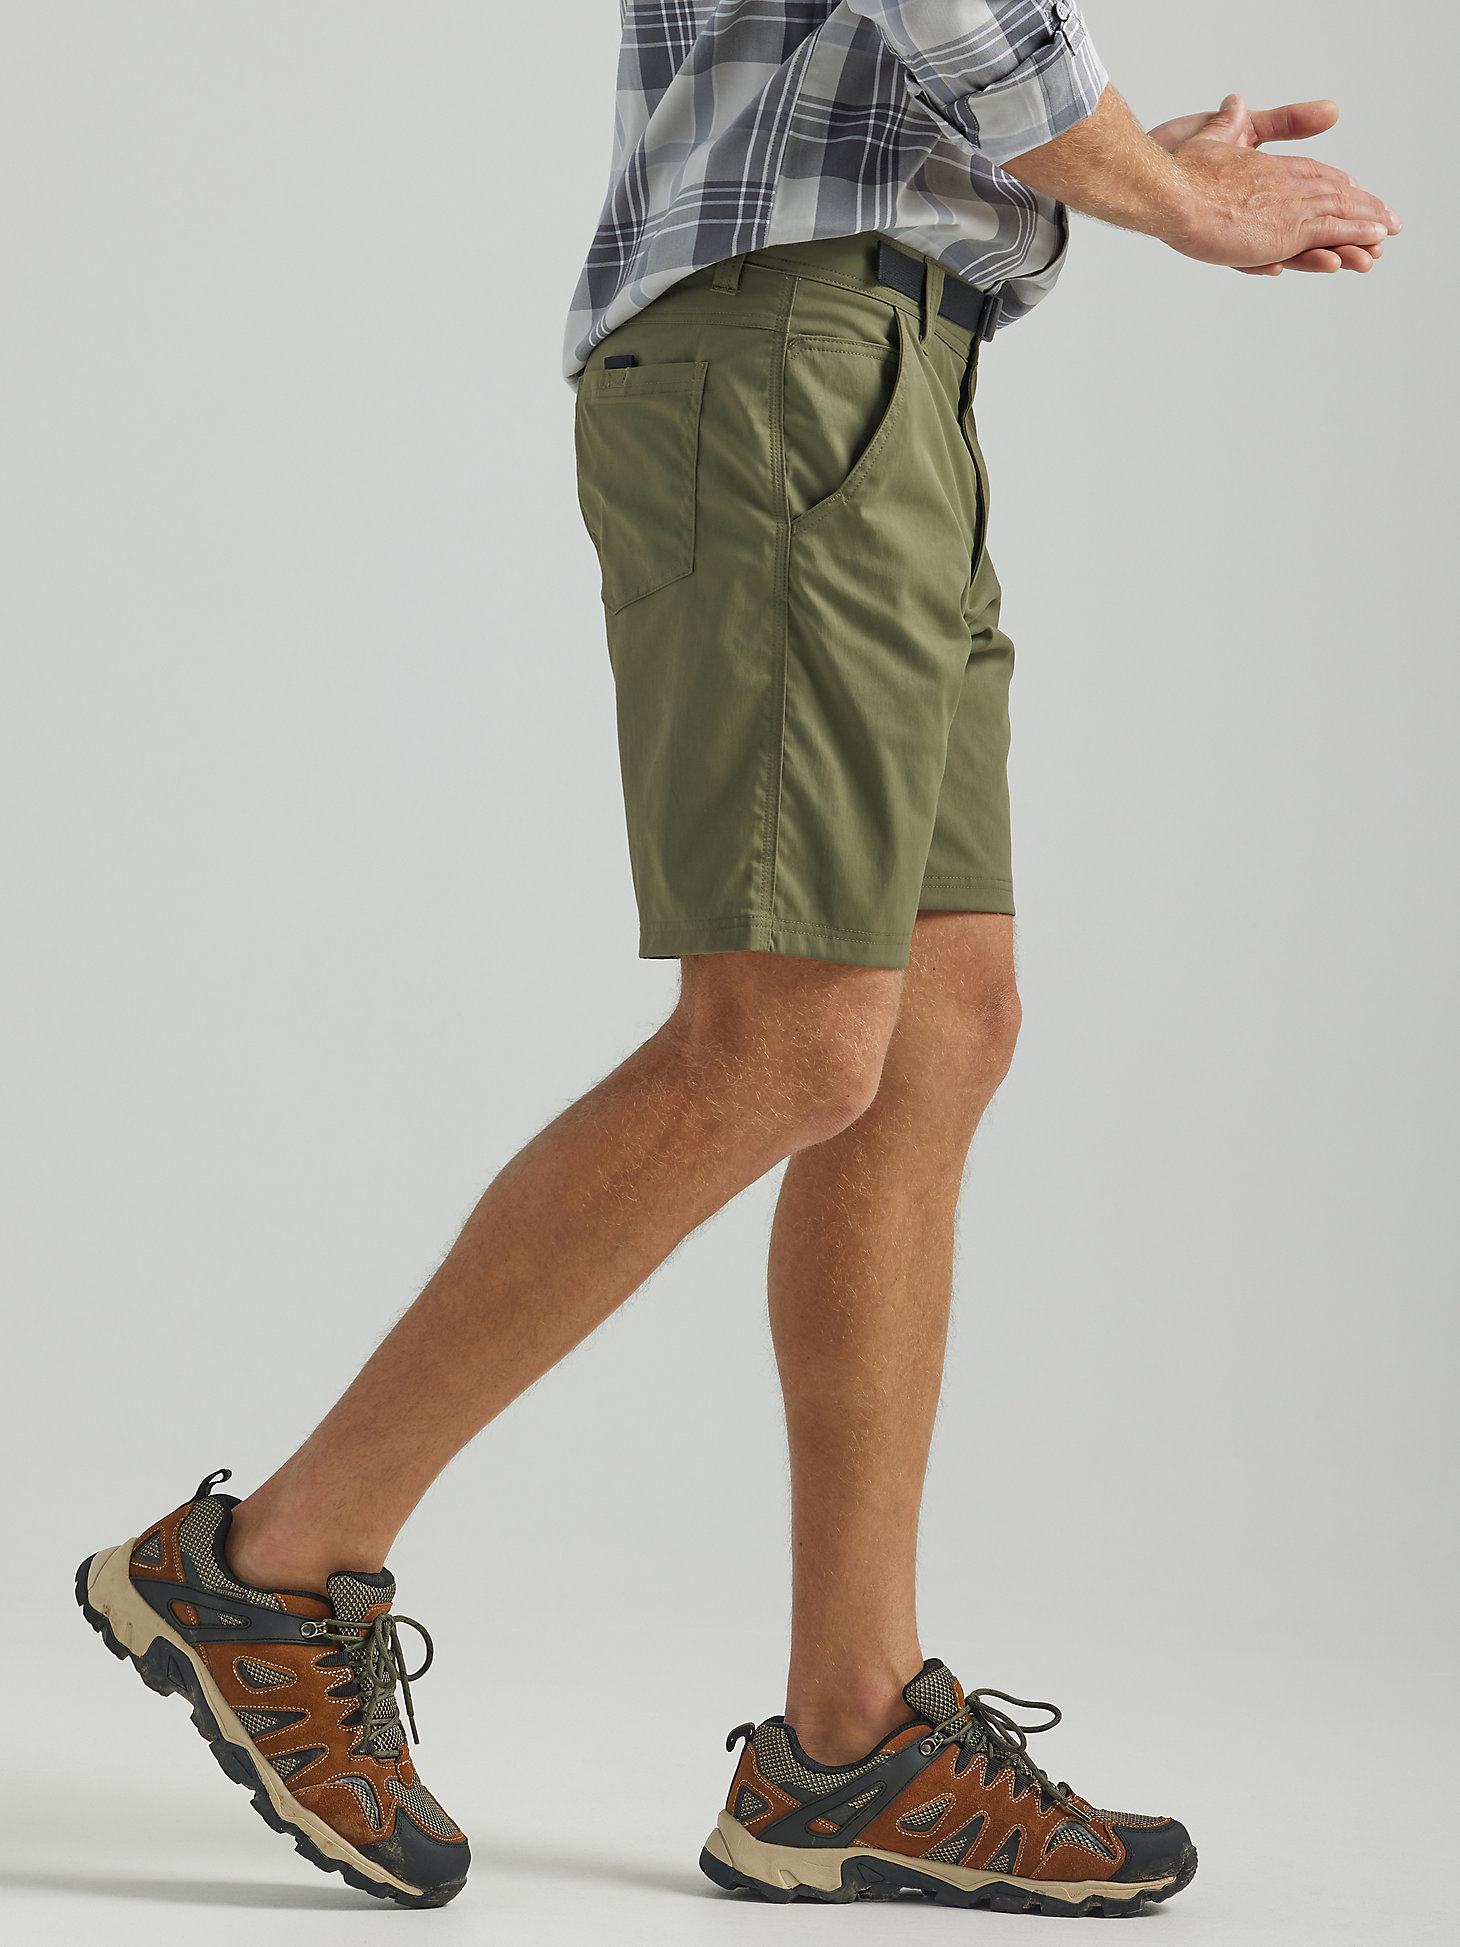 8 Pocket Belted Short in Dusty Olive alternative view 1